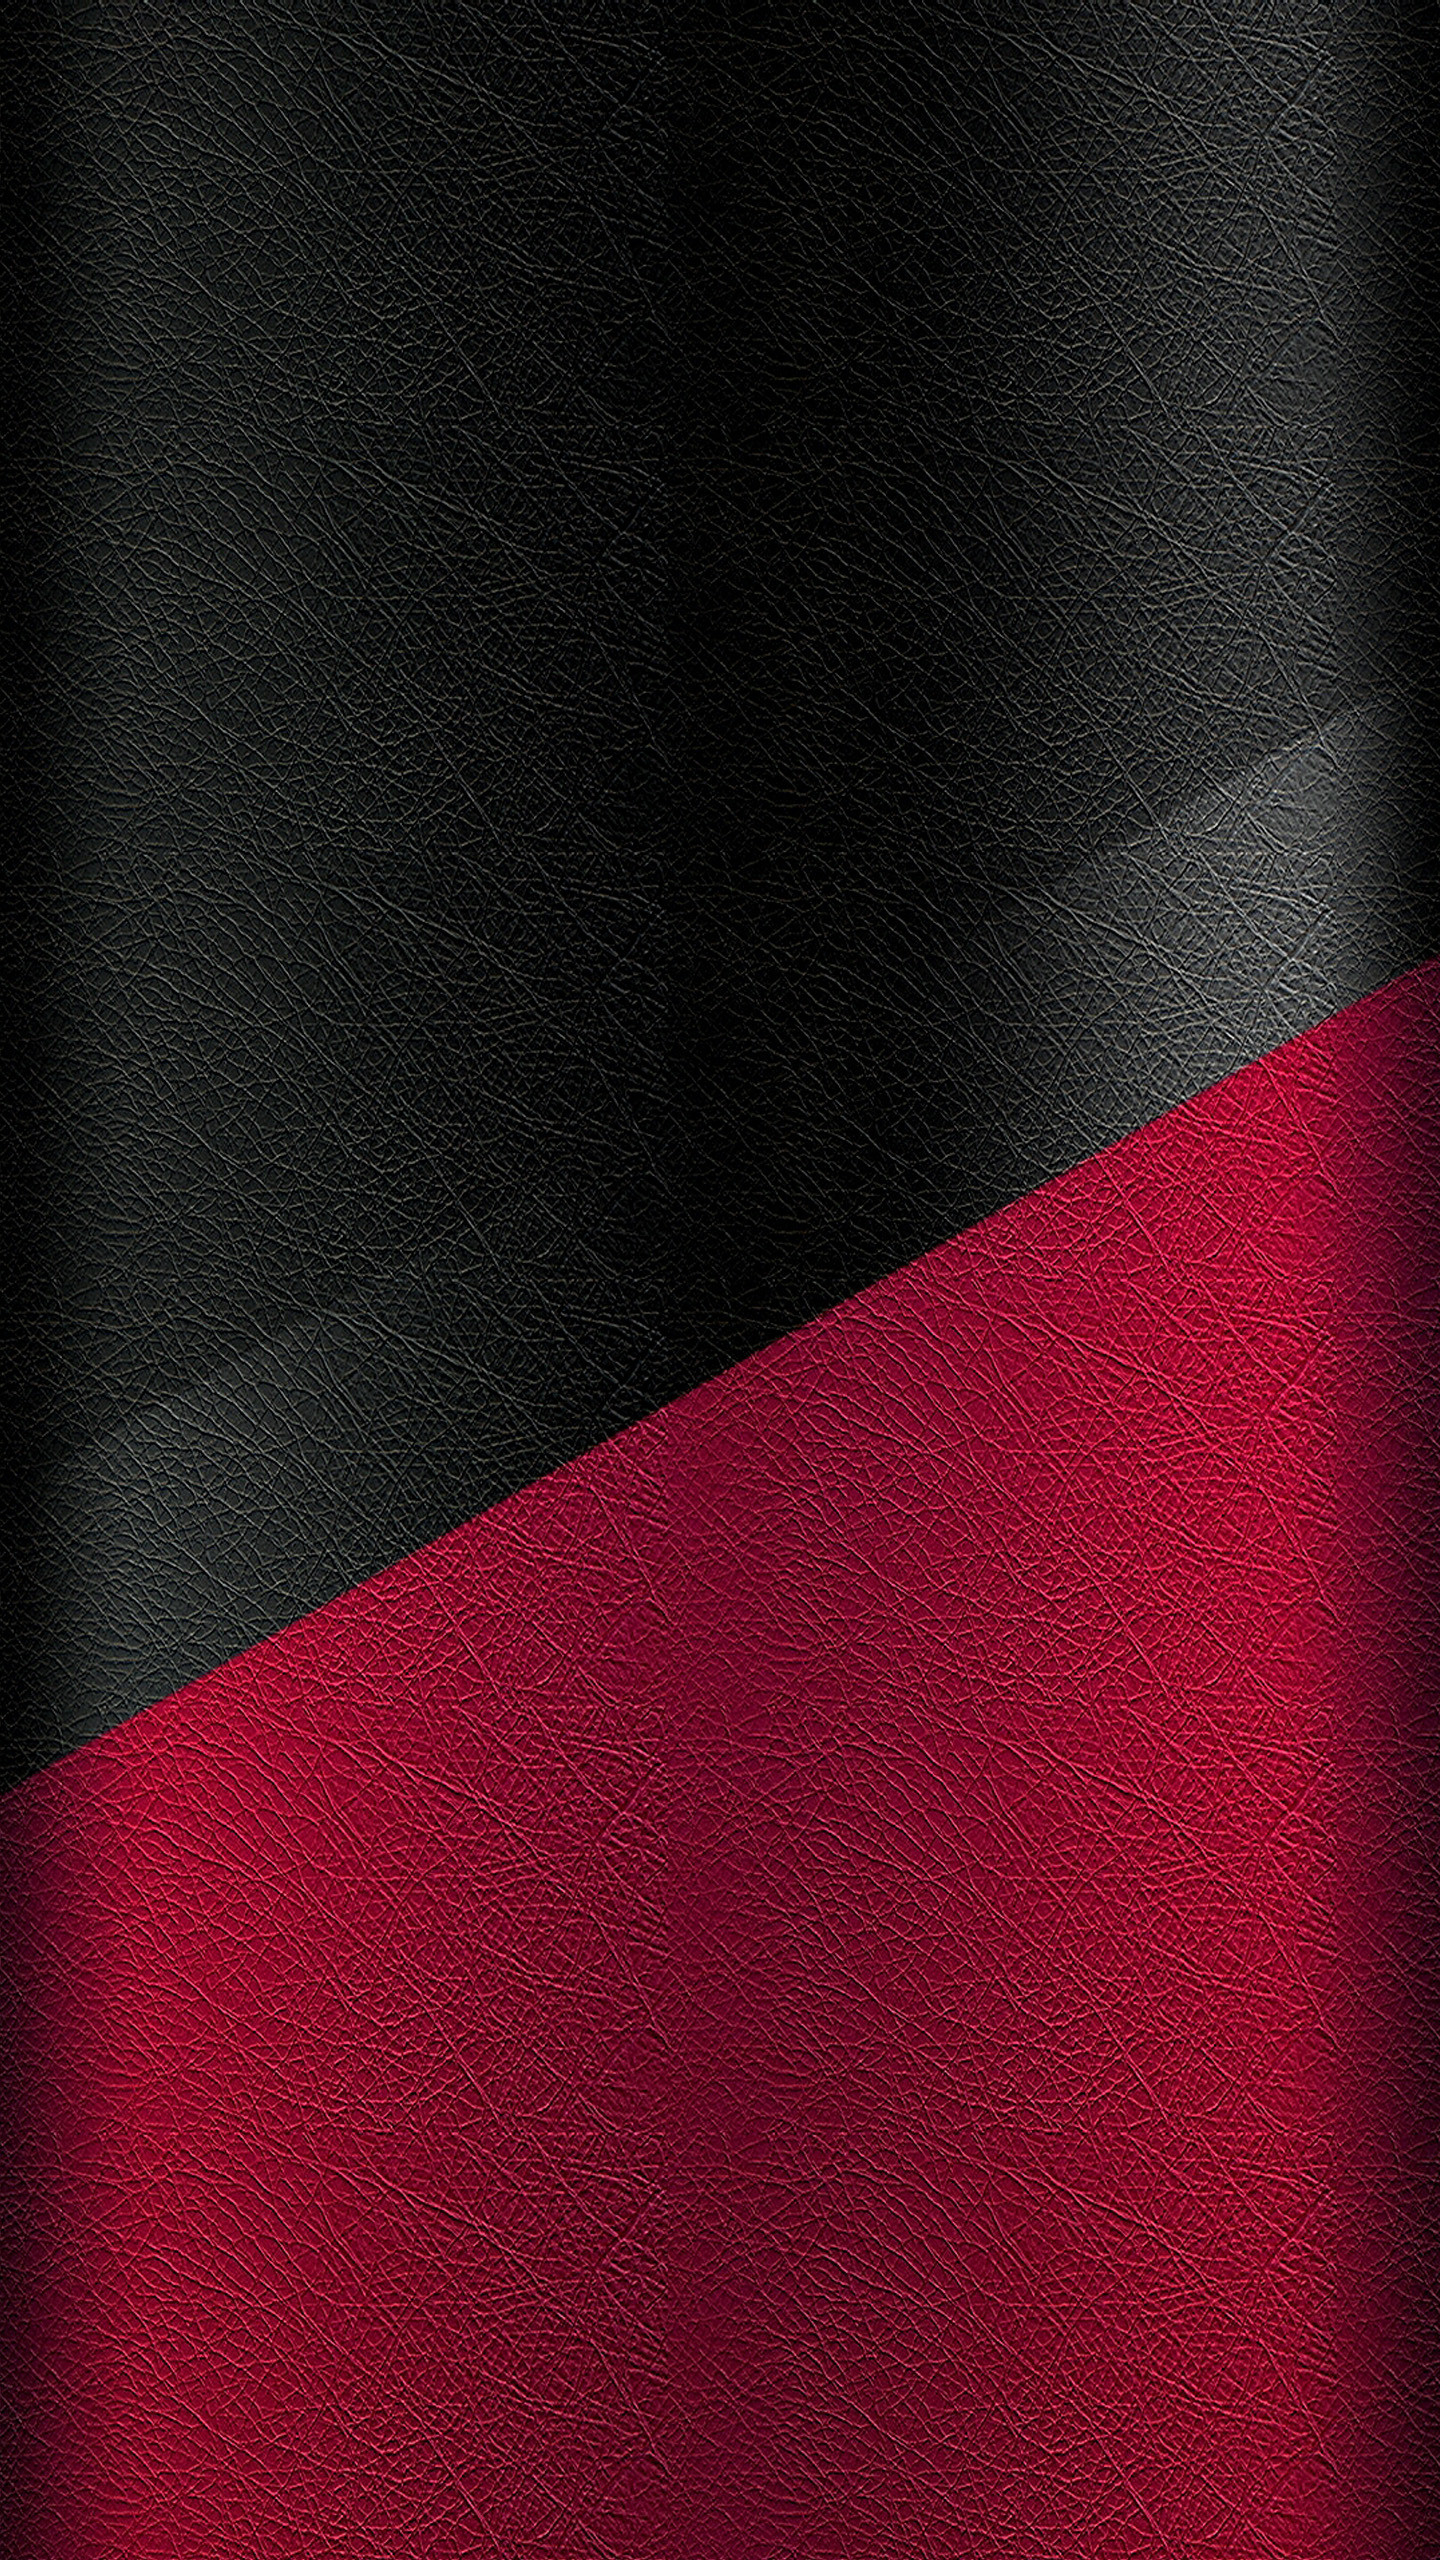 1440x2560 Dark Edge Wallpaper 05 - Black and Red Leather Pattern - HD Wallpapers